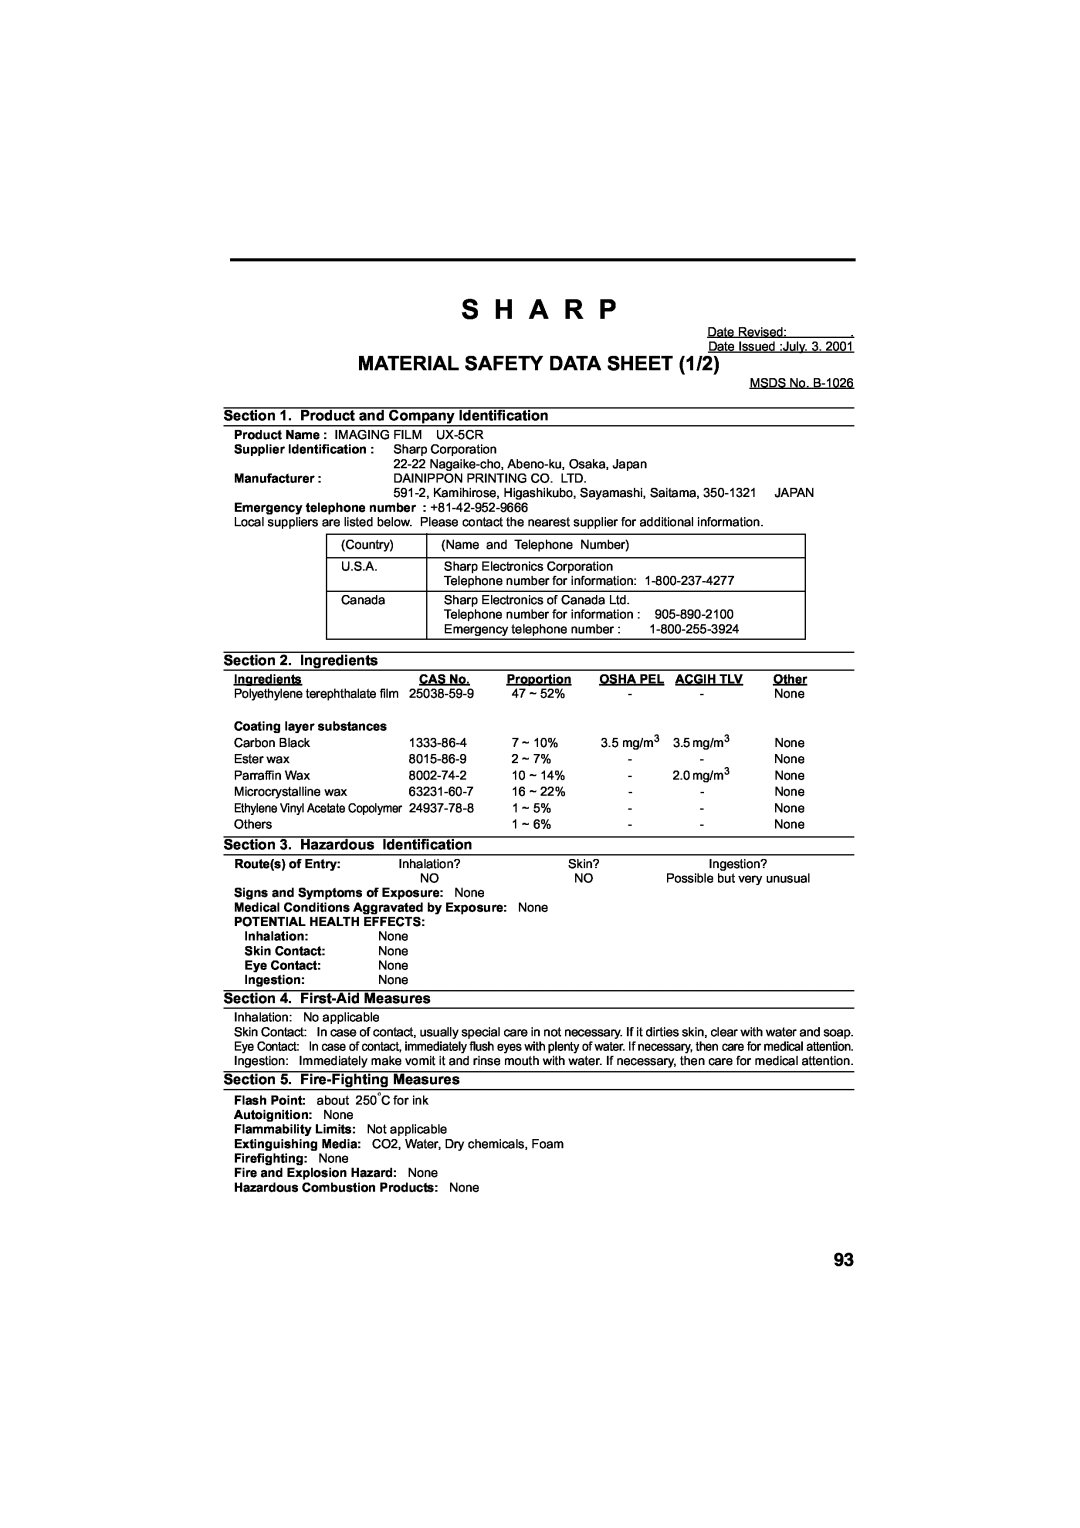 Sharp UX-A260 manual S H A R P, MATERIAL SAFETY DATA SHEET 1/2 